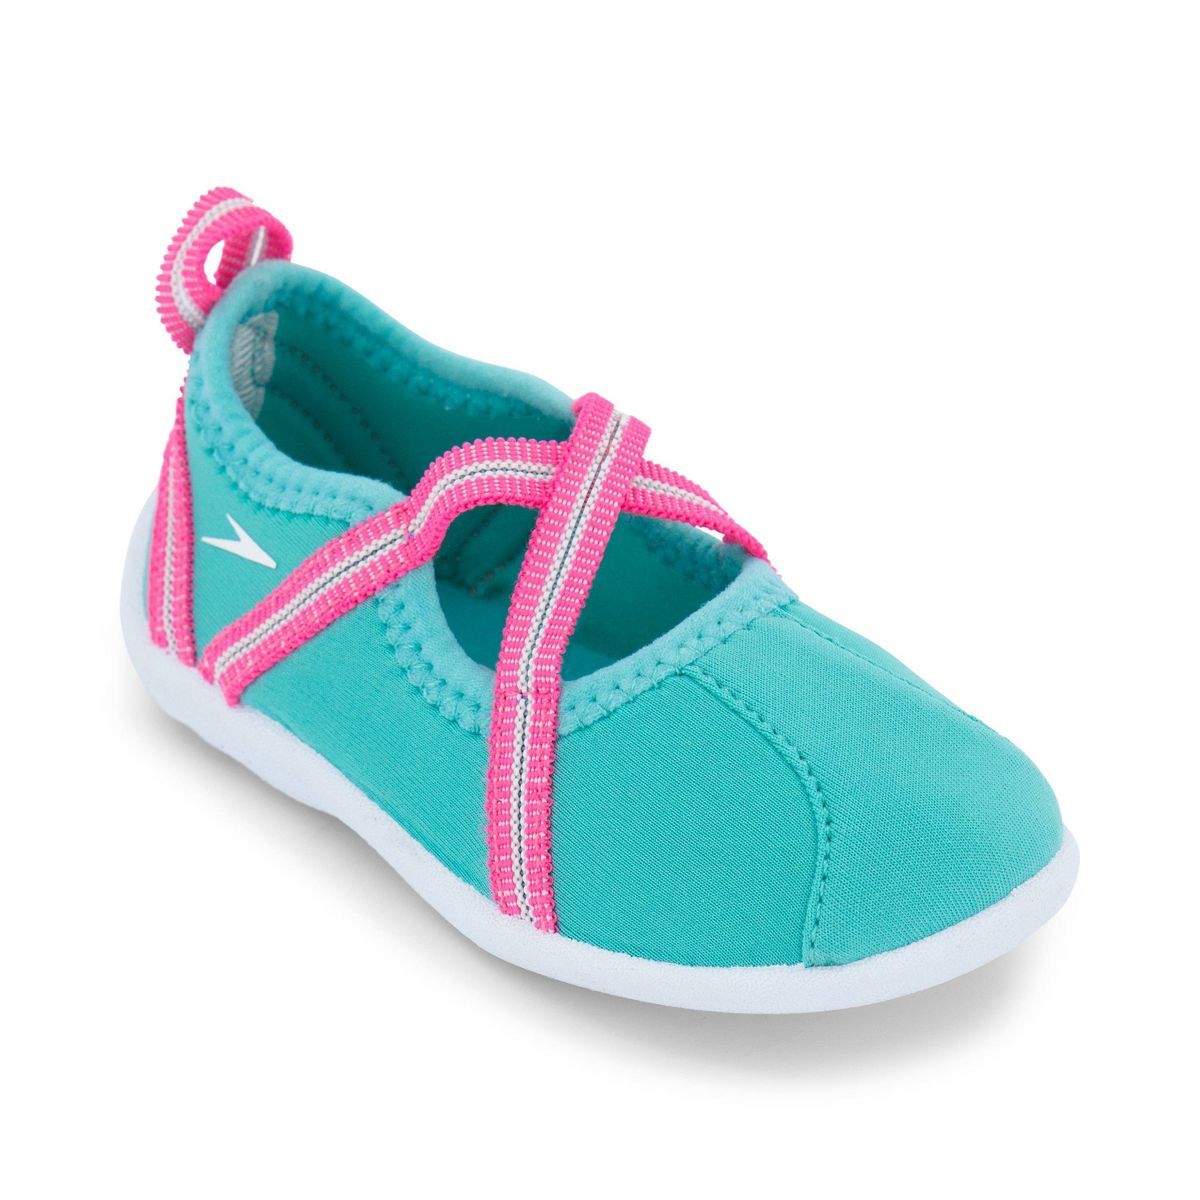 Speedo Toddler Mary Jane Water Shoes - Turquoise/Pink | Target